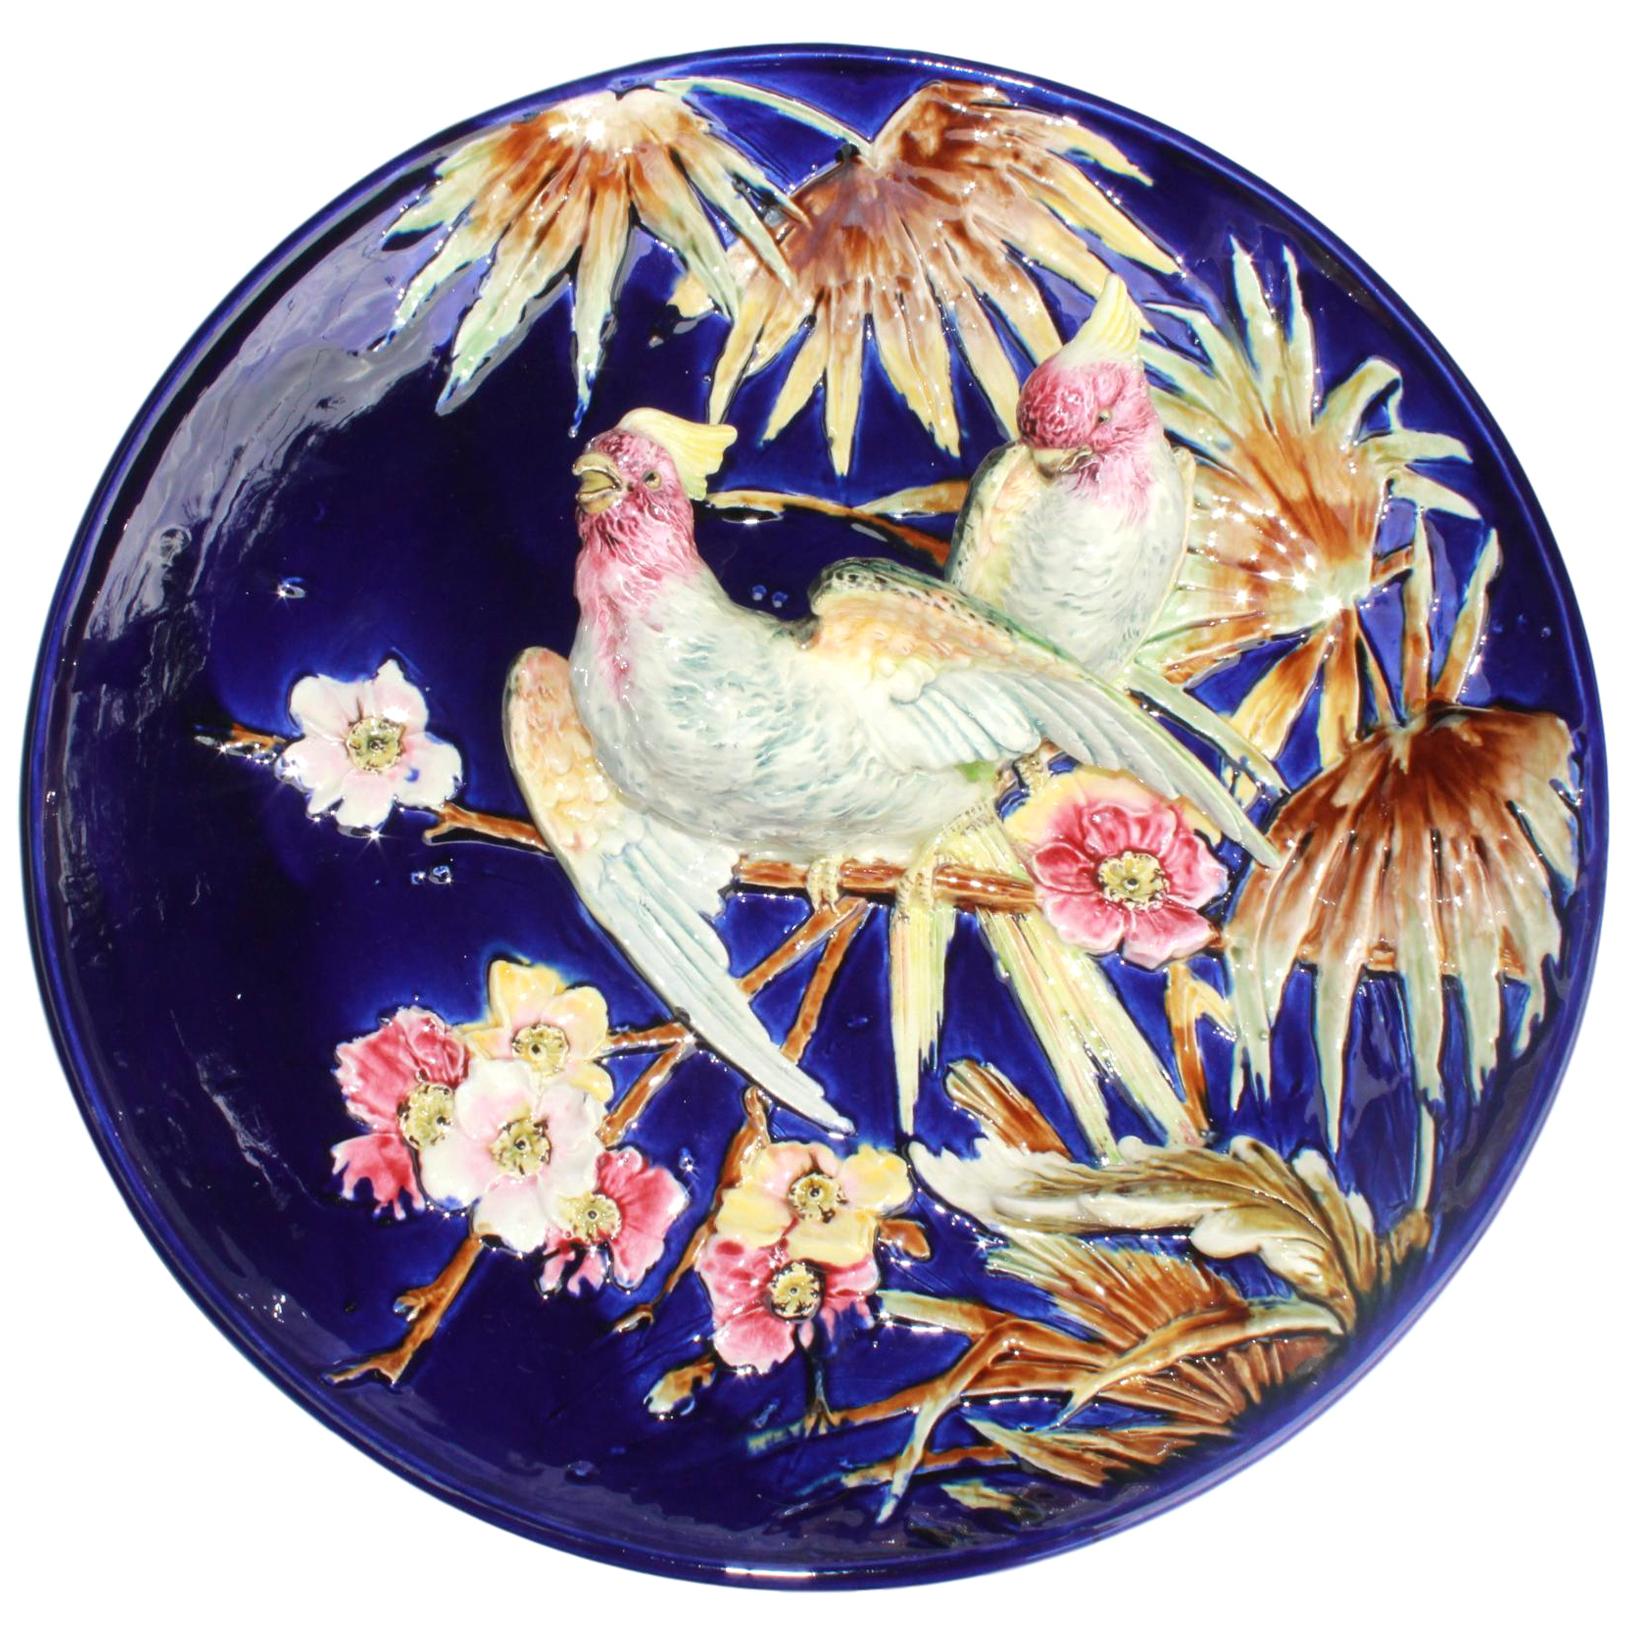 French Majolica Trompe L'oeil Charger, Parrots on a Cobalt Blue Ground, ca. 1880